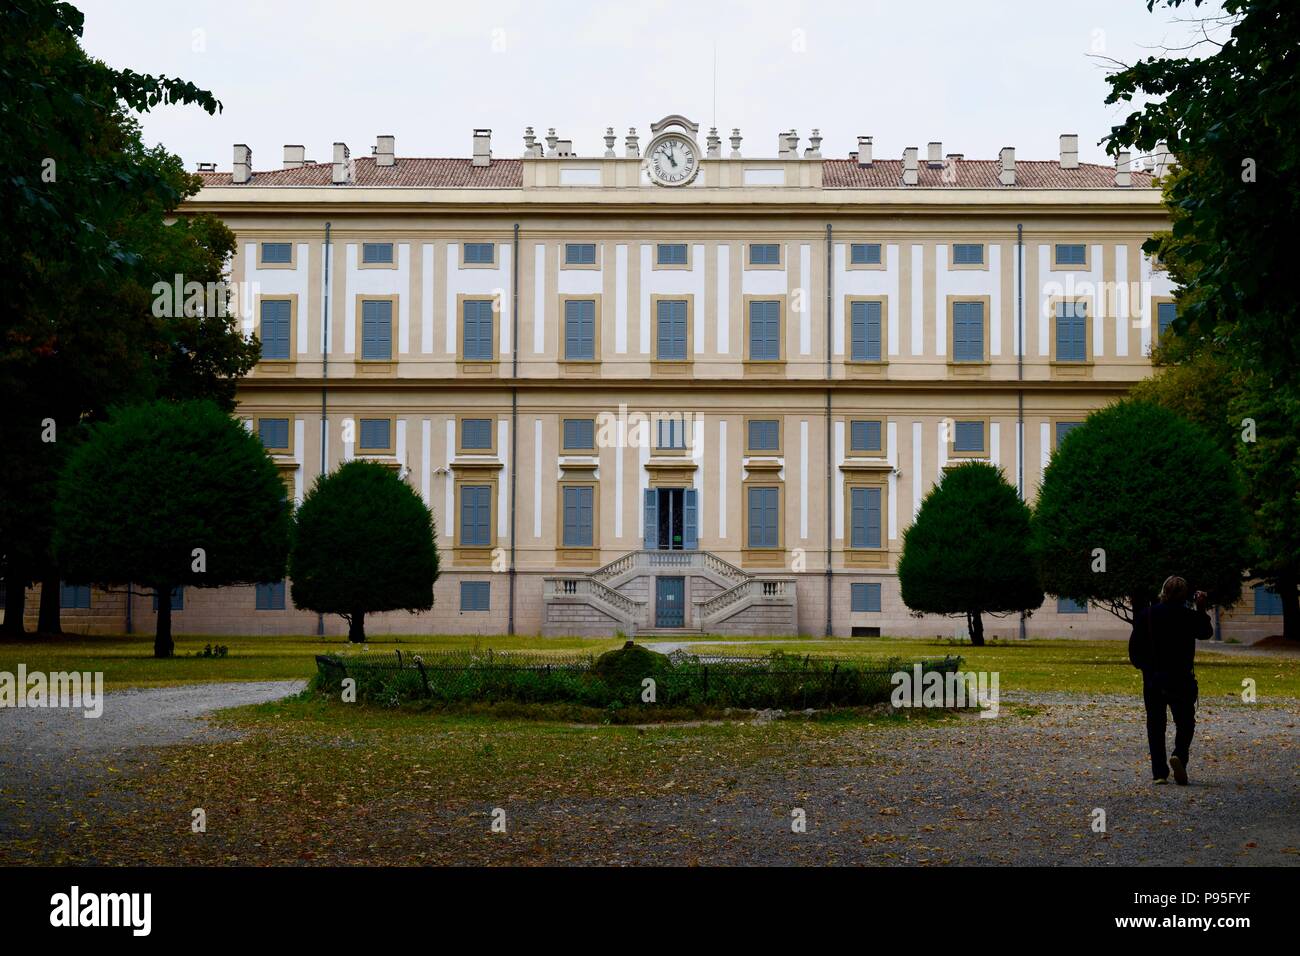 The South Wing of Villa Reale Di Monza, a royal stately home situated in Parco di Monza built in 1780, northern Italy. Stock Photo